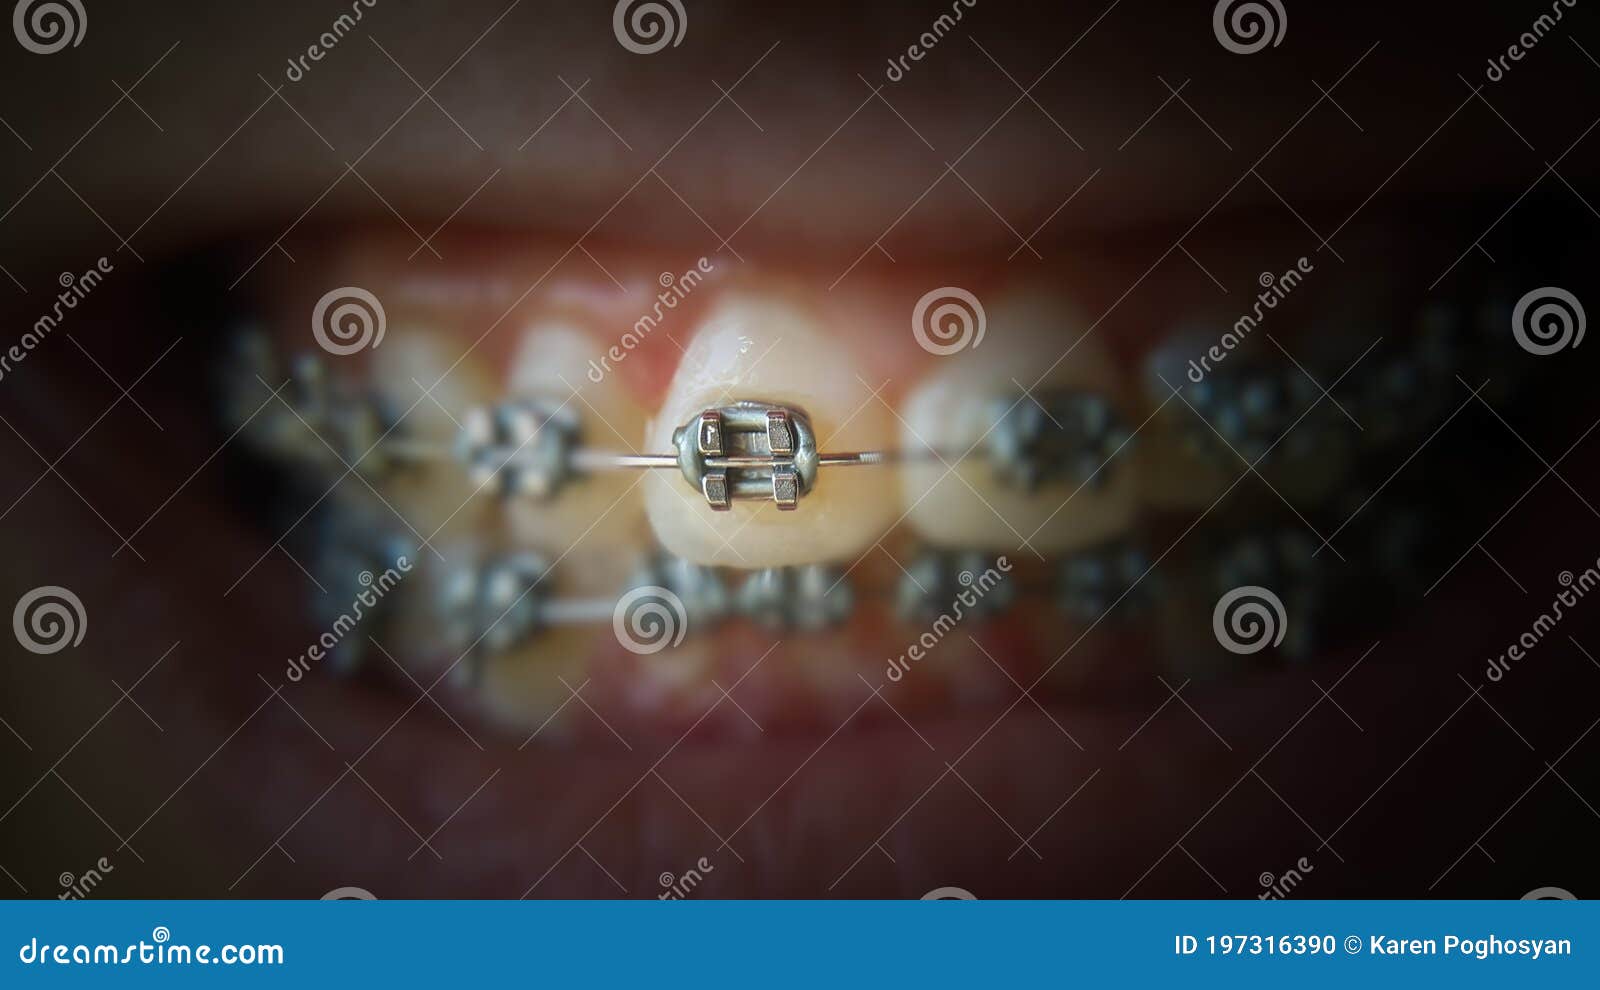 teeth with braces or braces in an open human mouth. selective focus on one bracket. dental care. straightened teeth